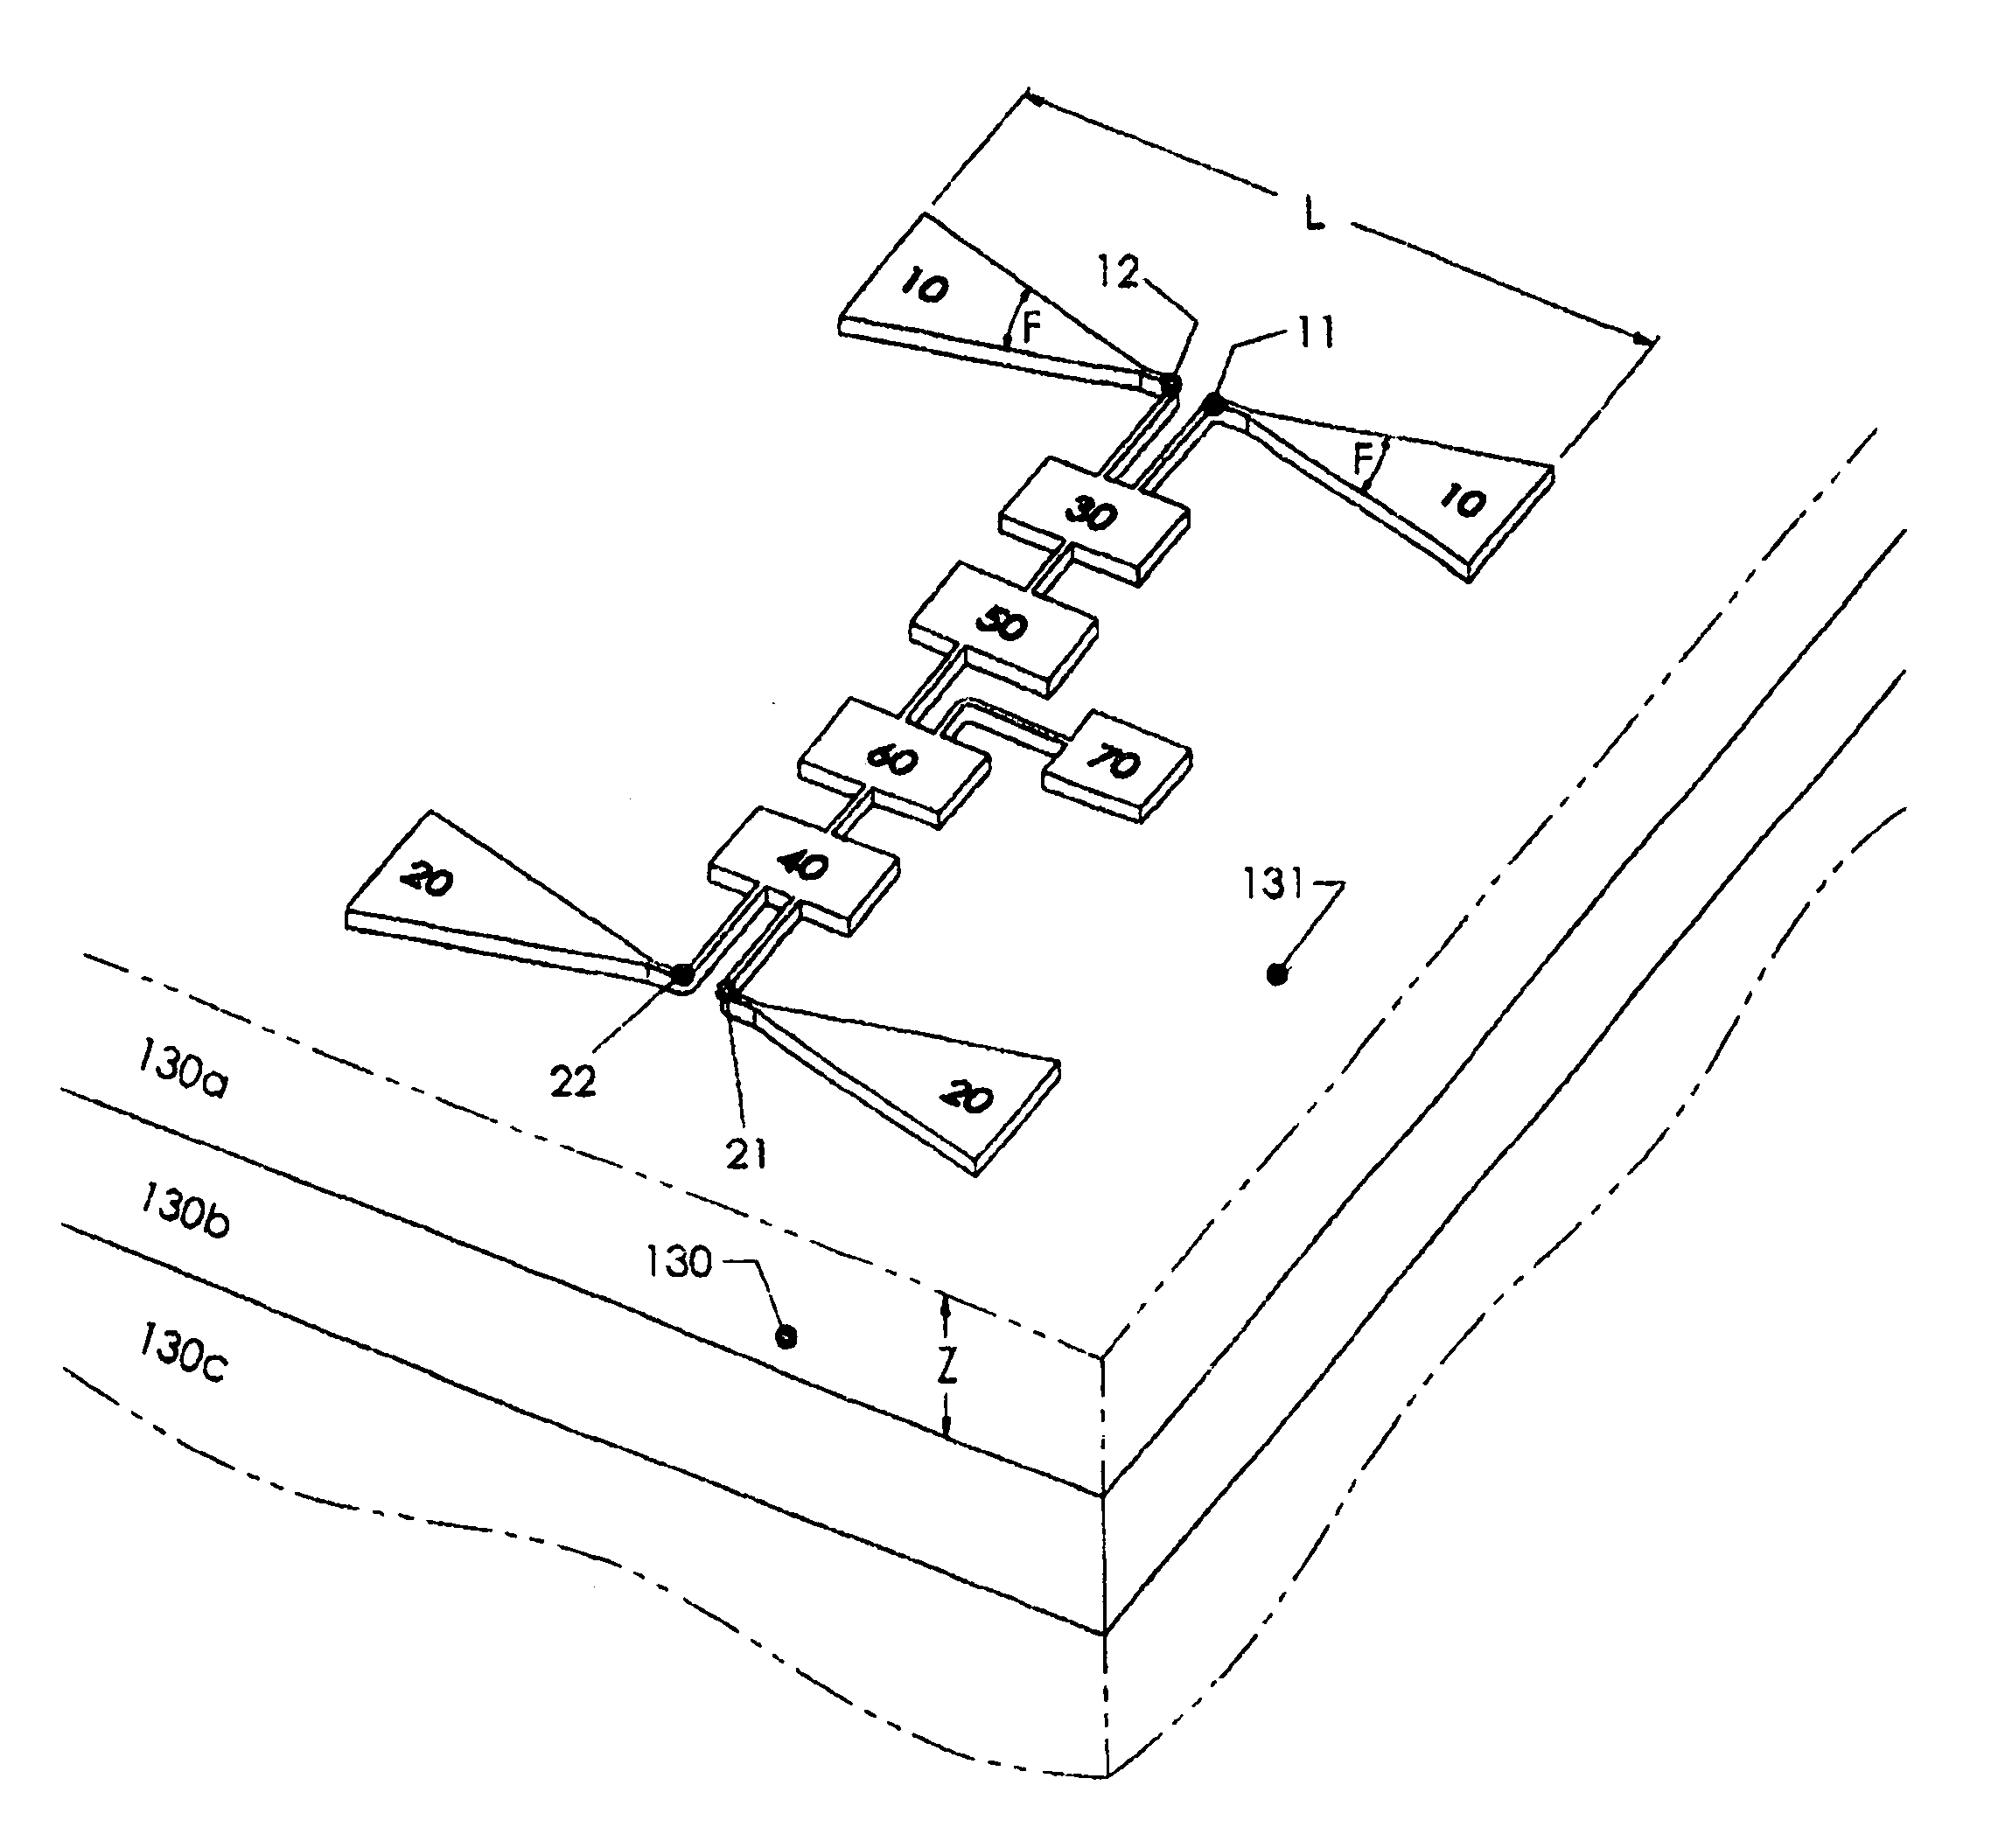 Method and apparatus for transmitting electromagnetic signals into the earth at frequencies below 500 KHz from a capacitor emplaced on the surface of the earth or raised aloft in an aircraft